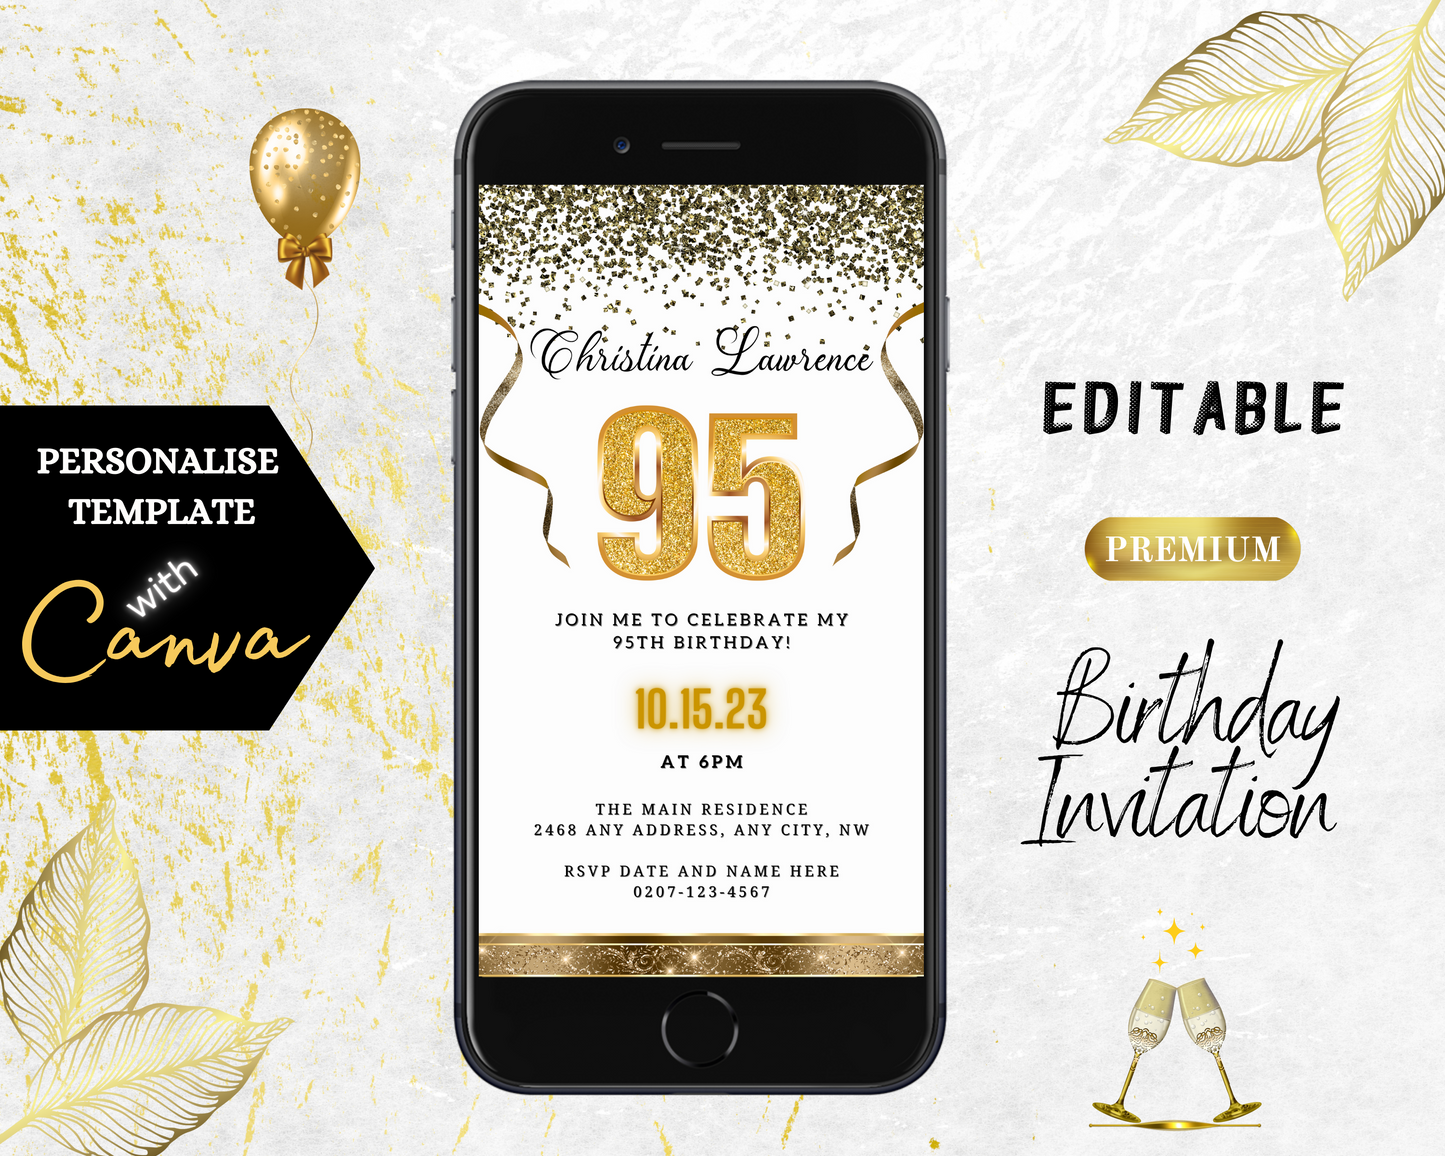 Customisable Digital White Gold Confetti 95th Birthday Evite displayed on a smartphone screen, featuring elegant gold text and decorative elements.